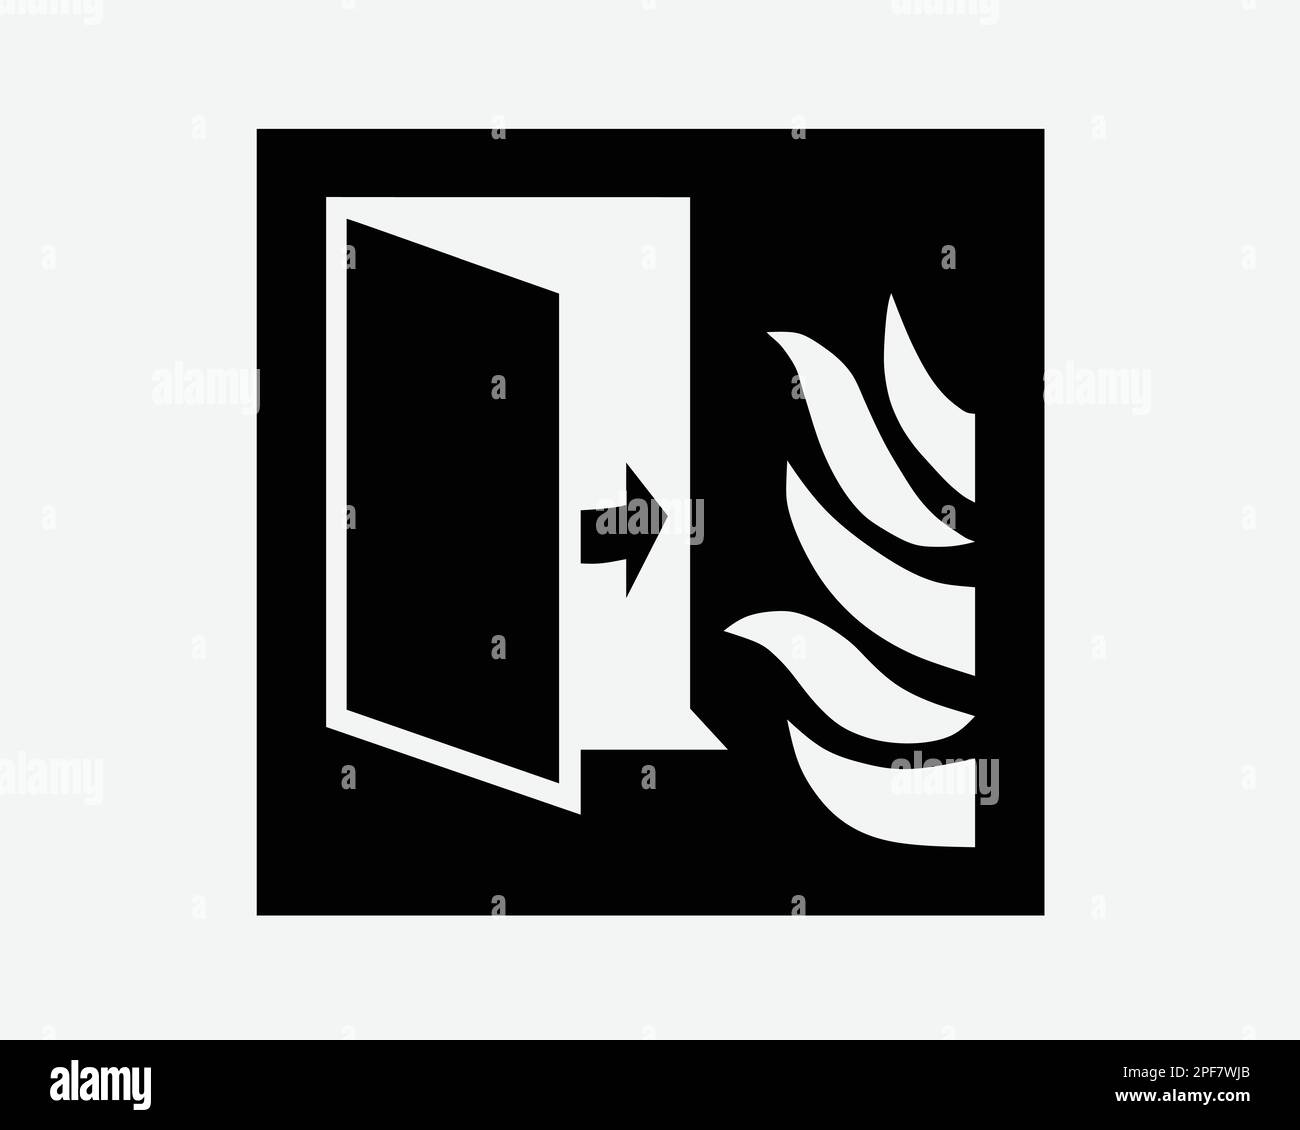 Emergency Fire Escape Exit Door Path Evacuate Signage Black White Silhouette Sign Symbol Icon Clipart Graphic Artwork Pictogram Illustration Vector Stock Vector